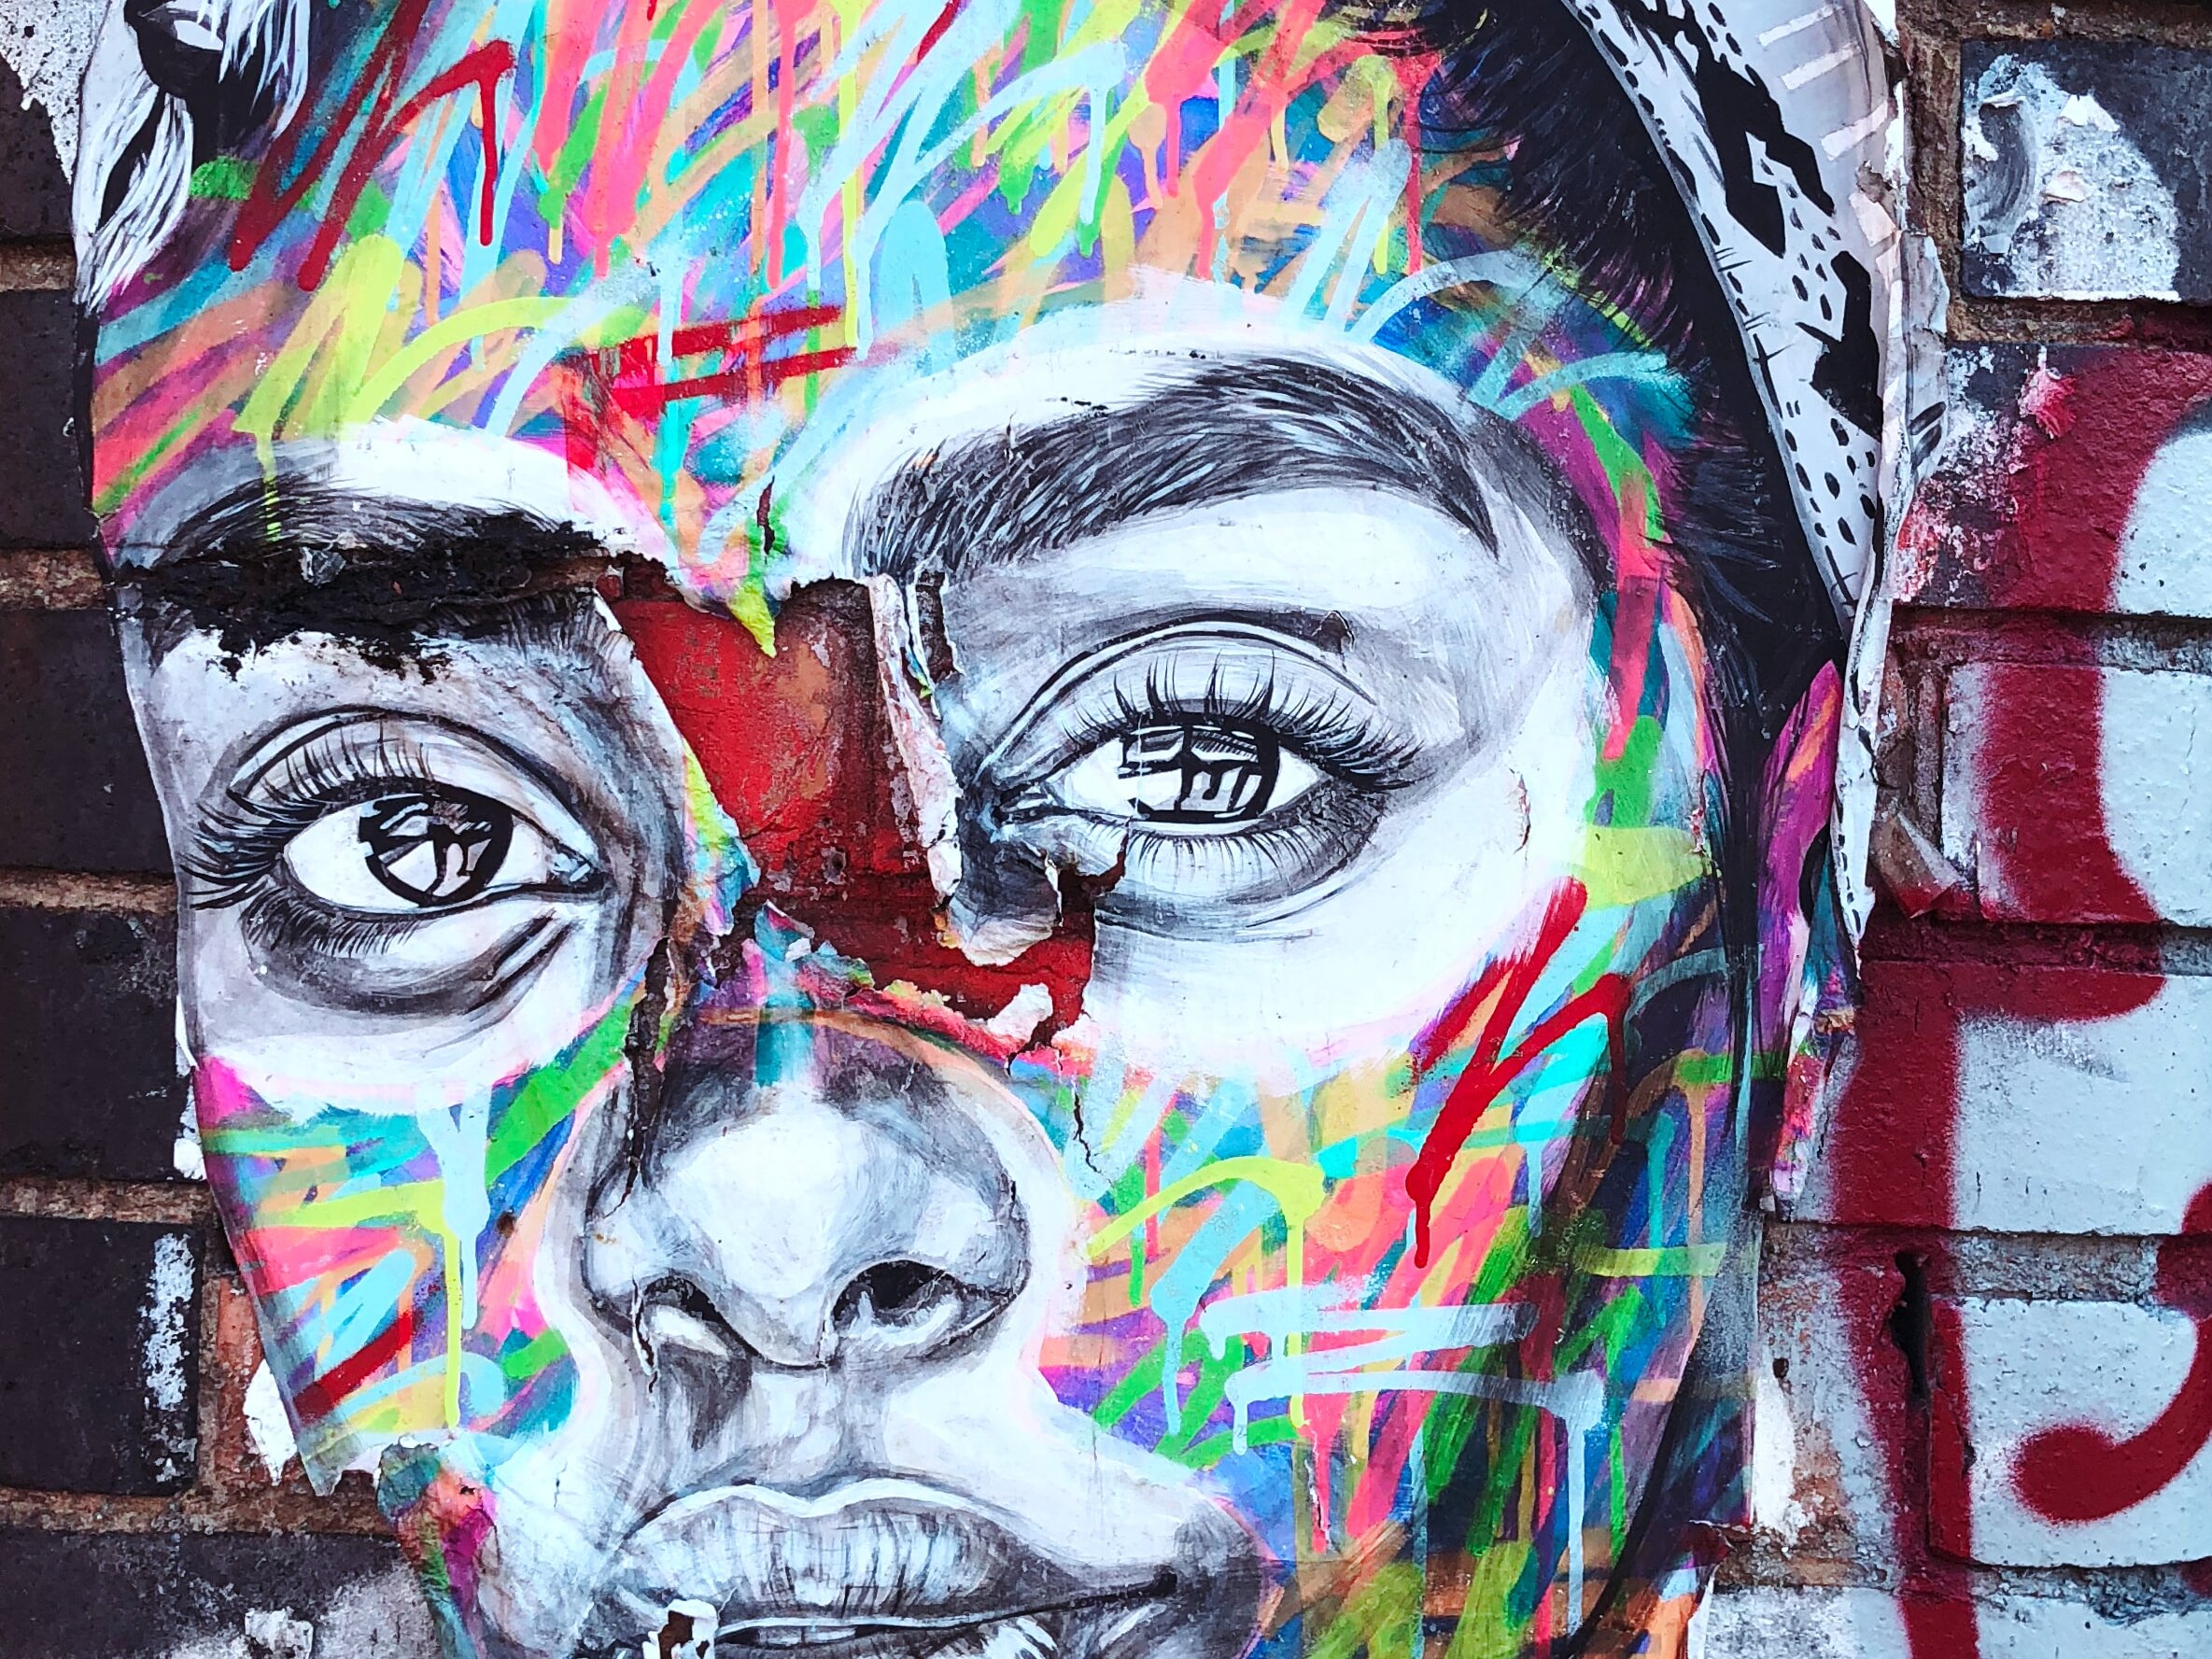 Can Street Art Help Create Kinder, Happier, and More Social City Citizens and Communities?